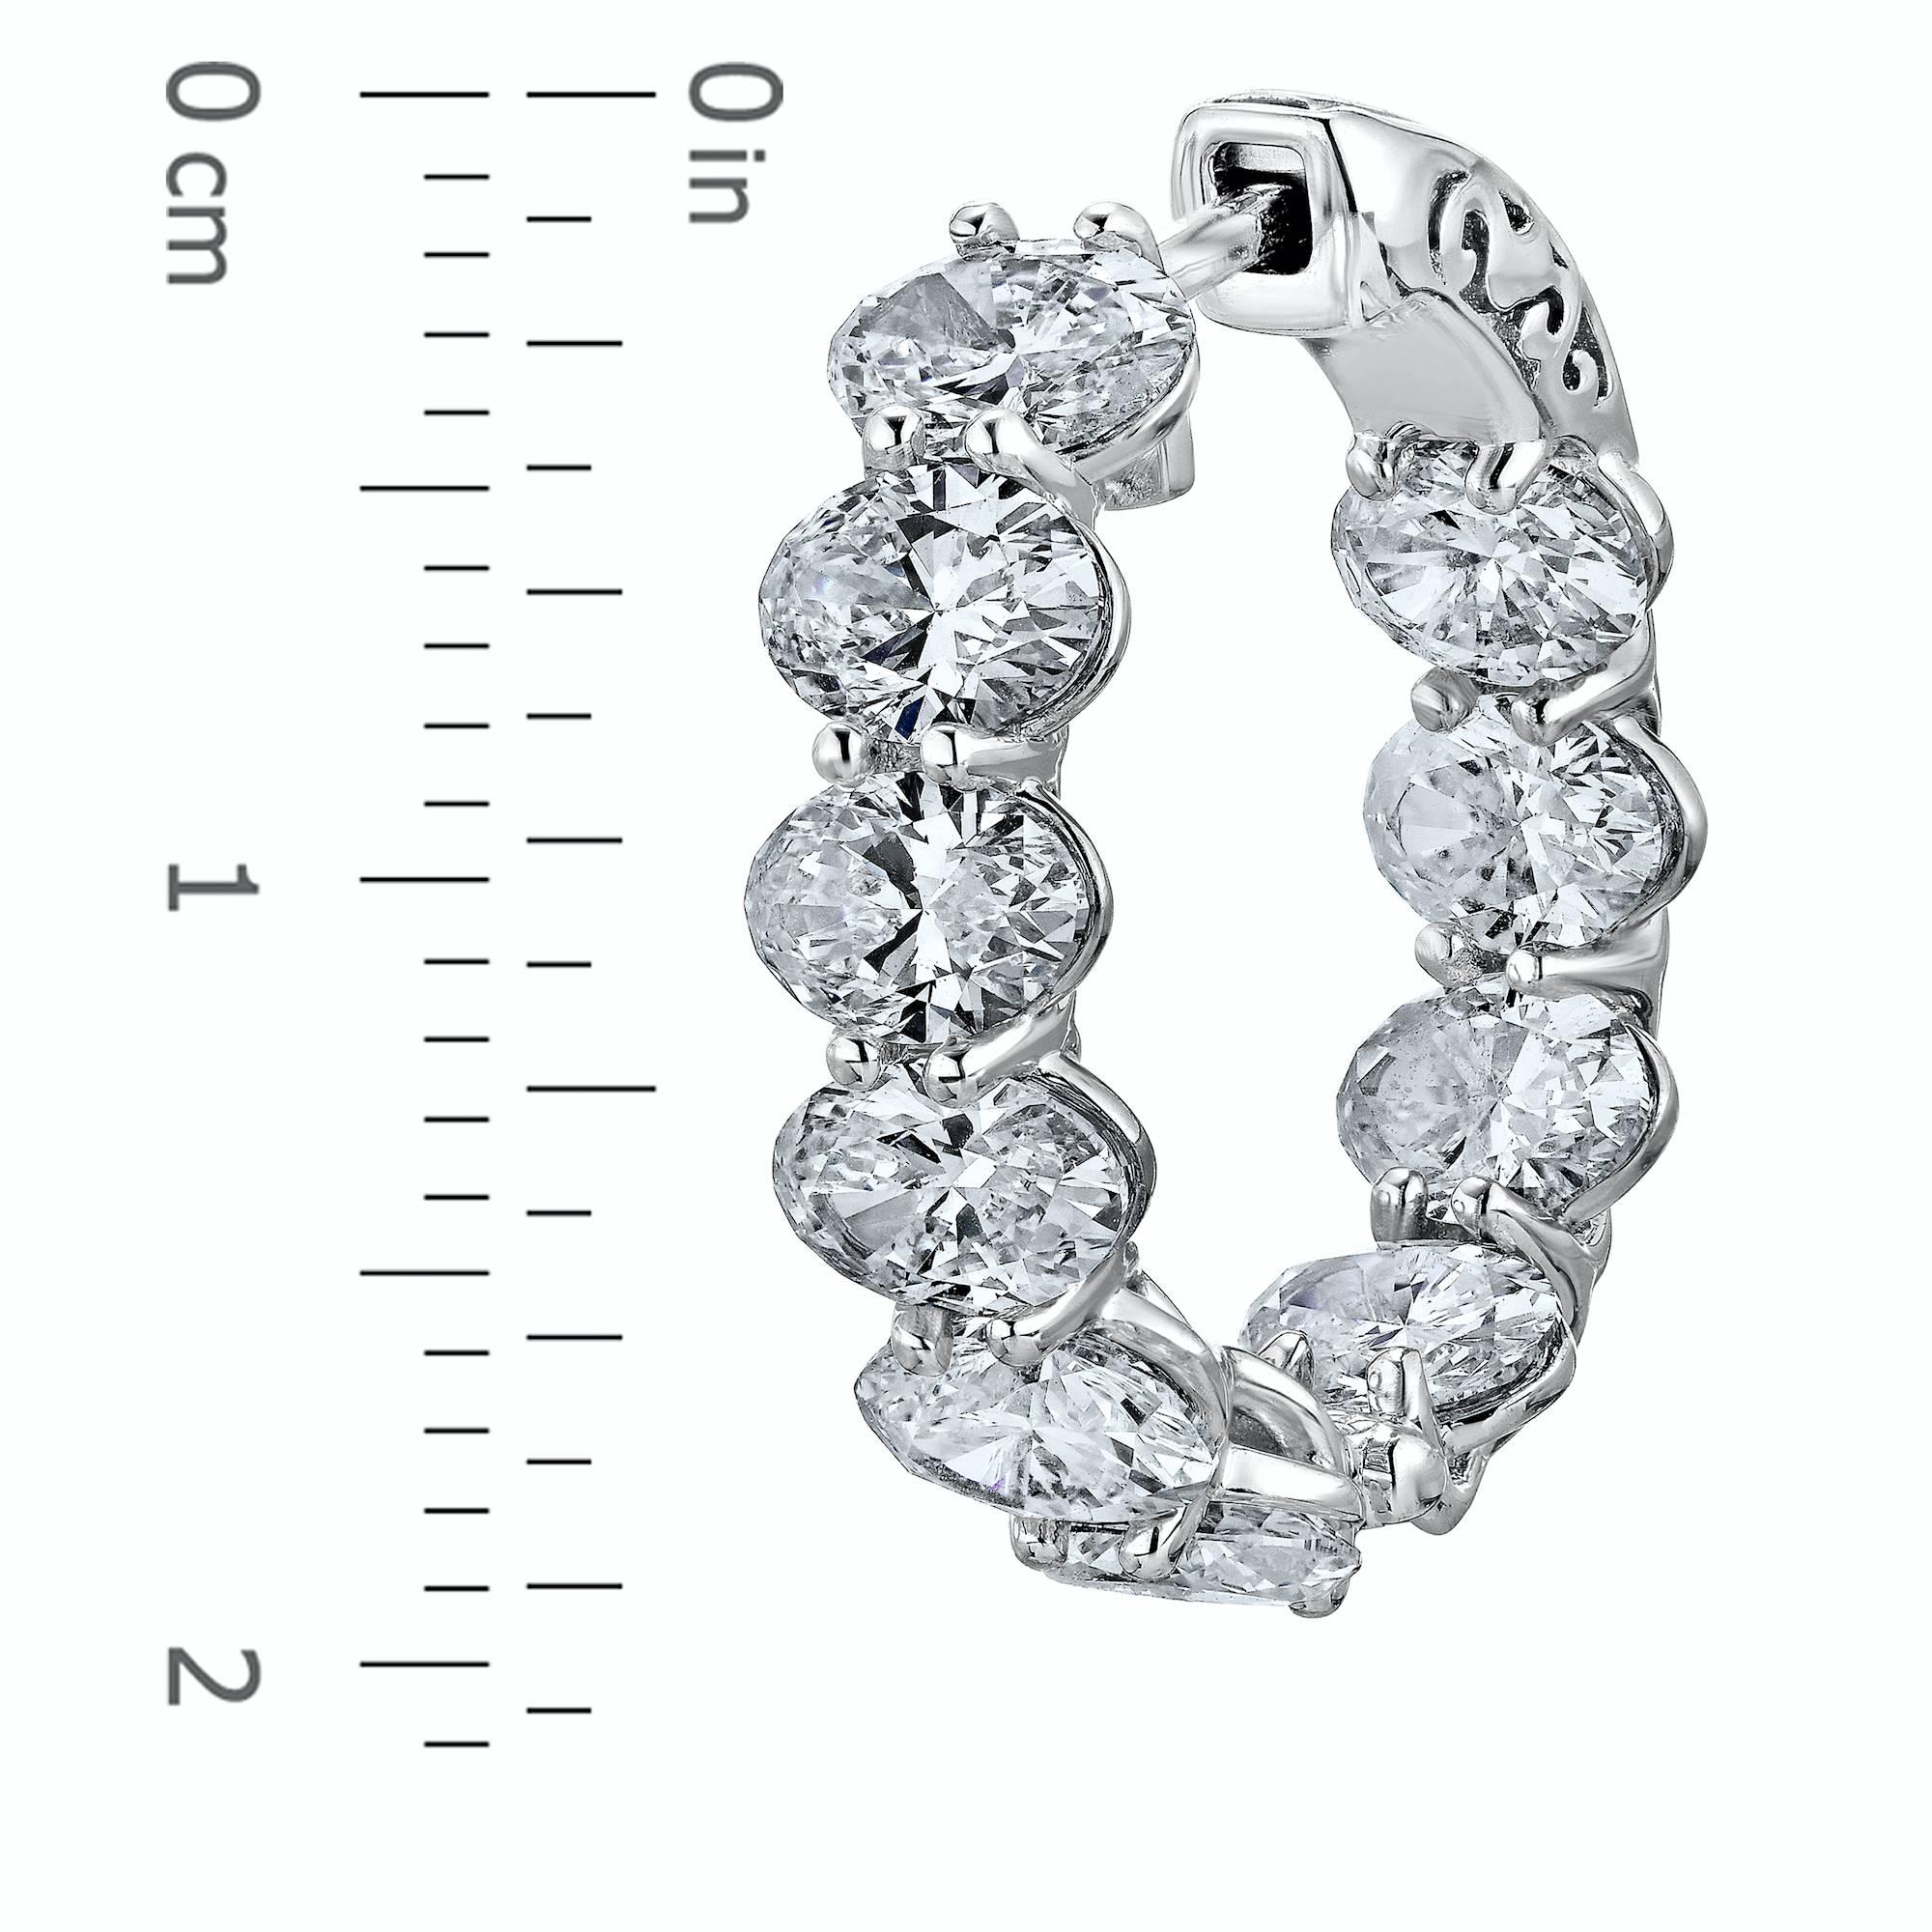 Unique Oval Shaped Diamonds Set in our one and only hand made diamond hoops. In addition to the diamonds being oval shaped, we also made this earring oval so that the inside diamonds would be even more visible. 
Approx total weight: 6.05ct
Diamond